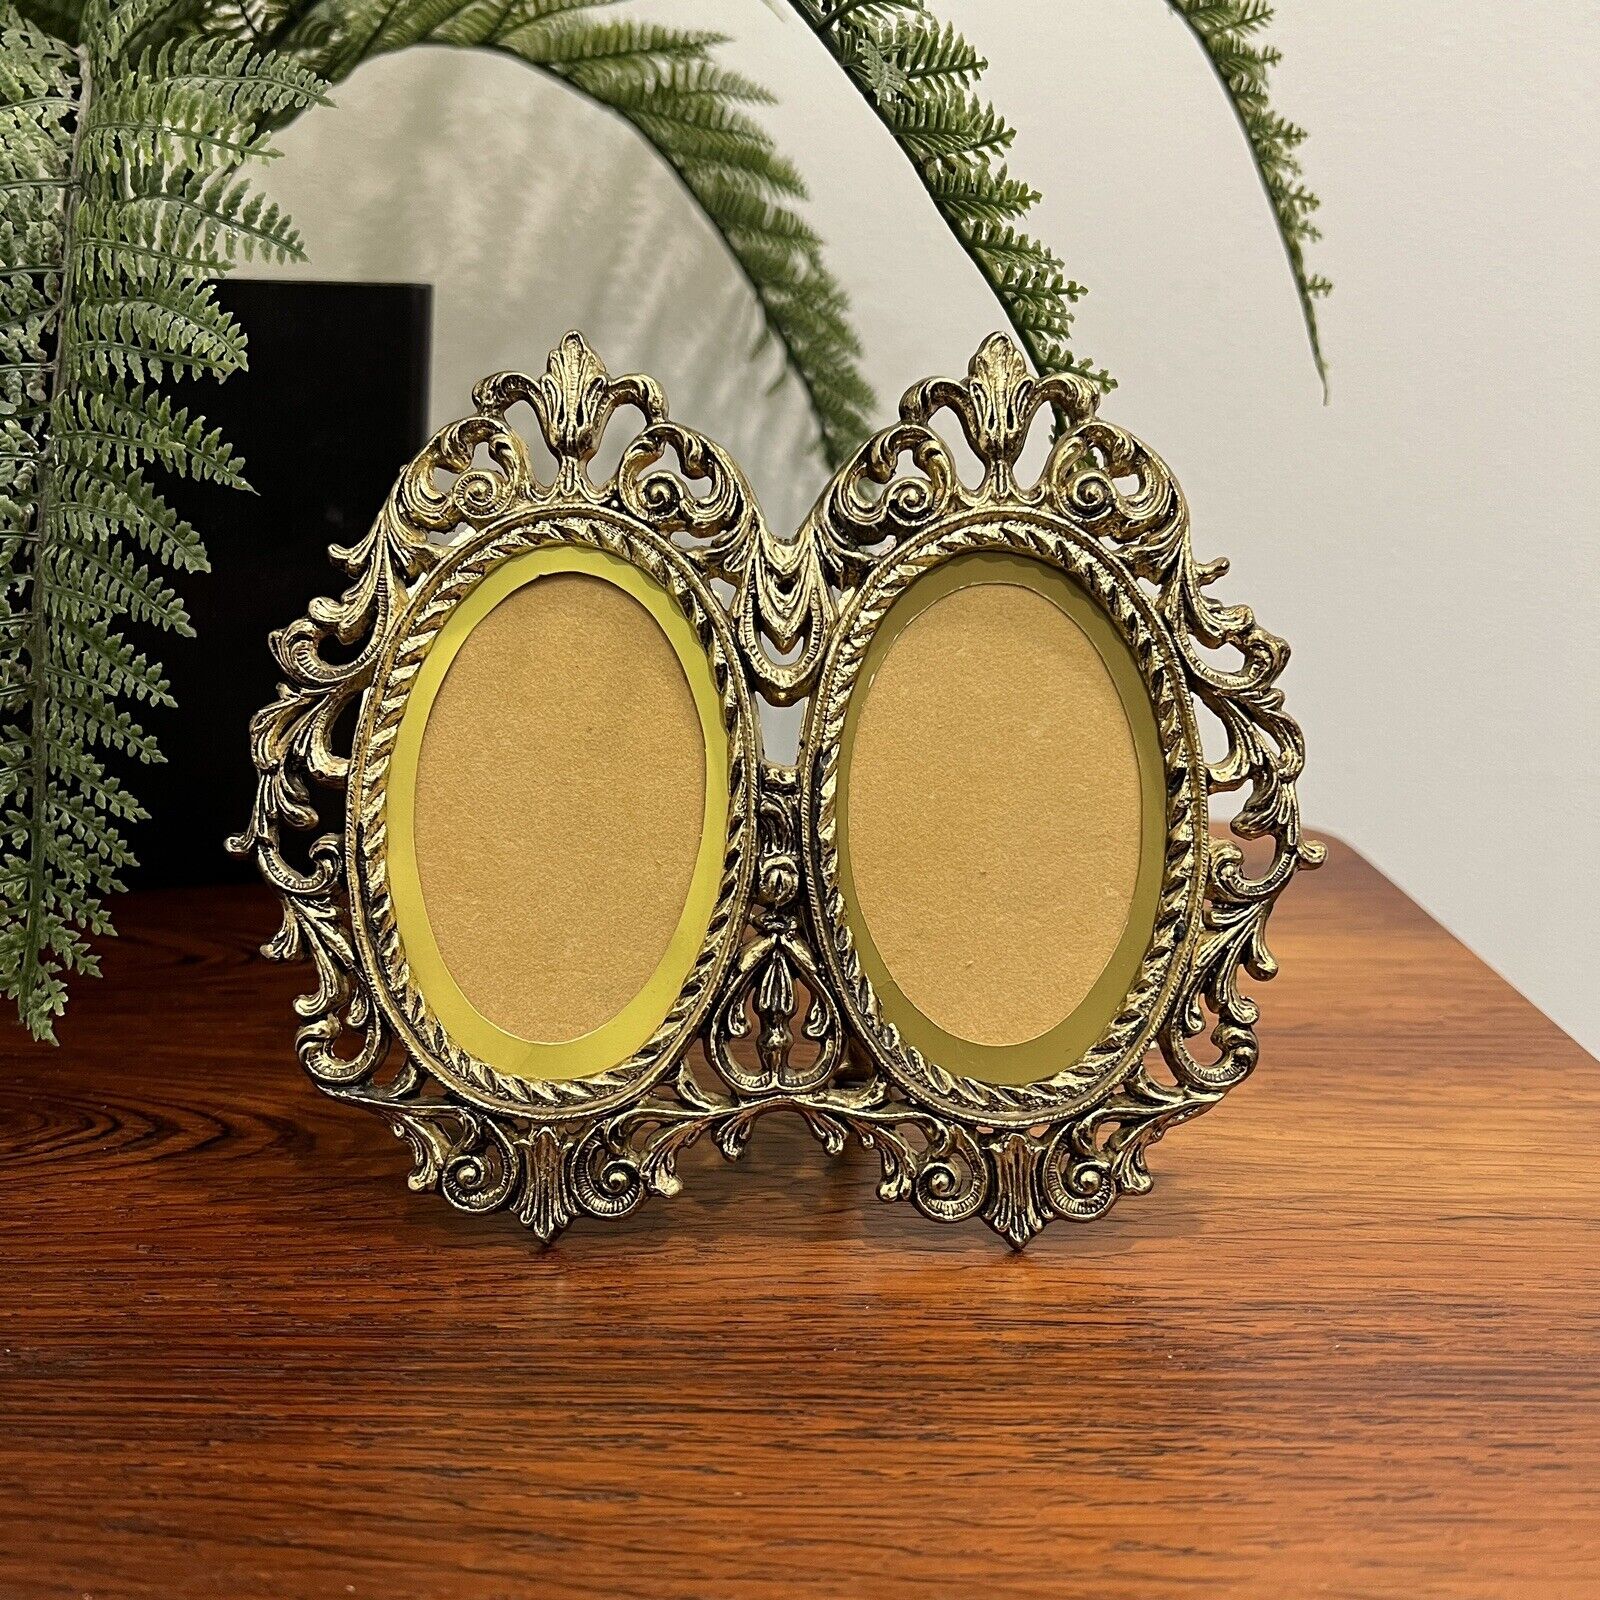 Vintage Gold Tone Ornate Metal Double Picture Frame